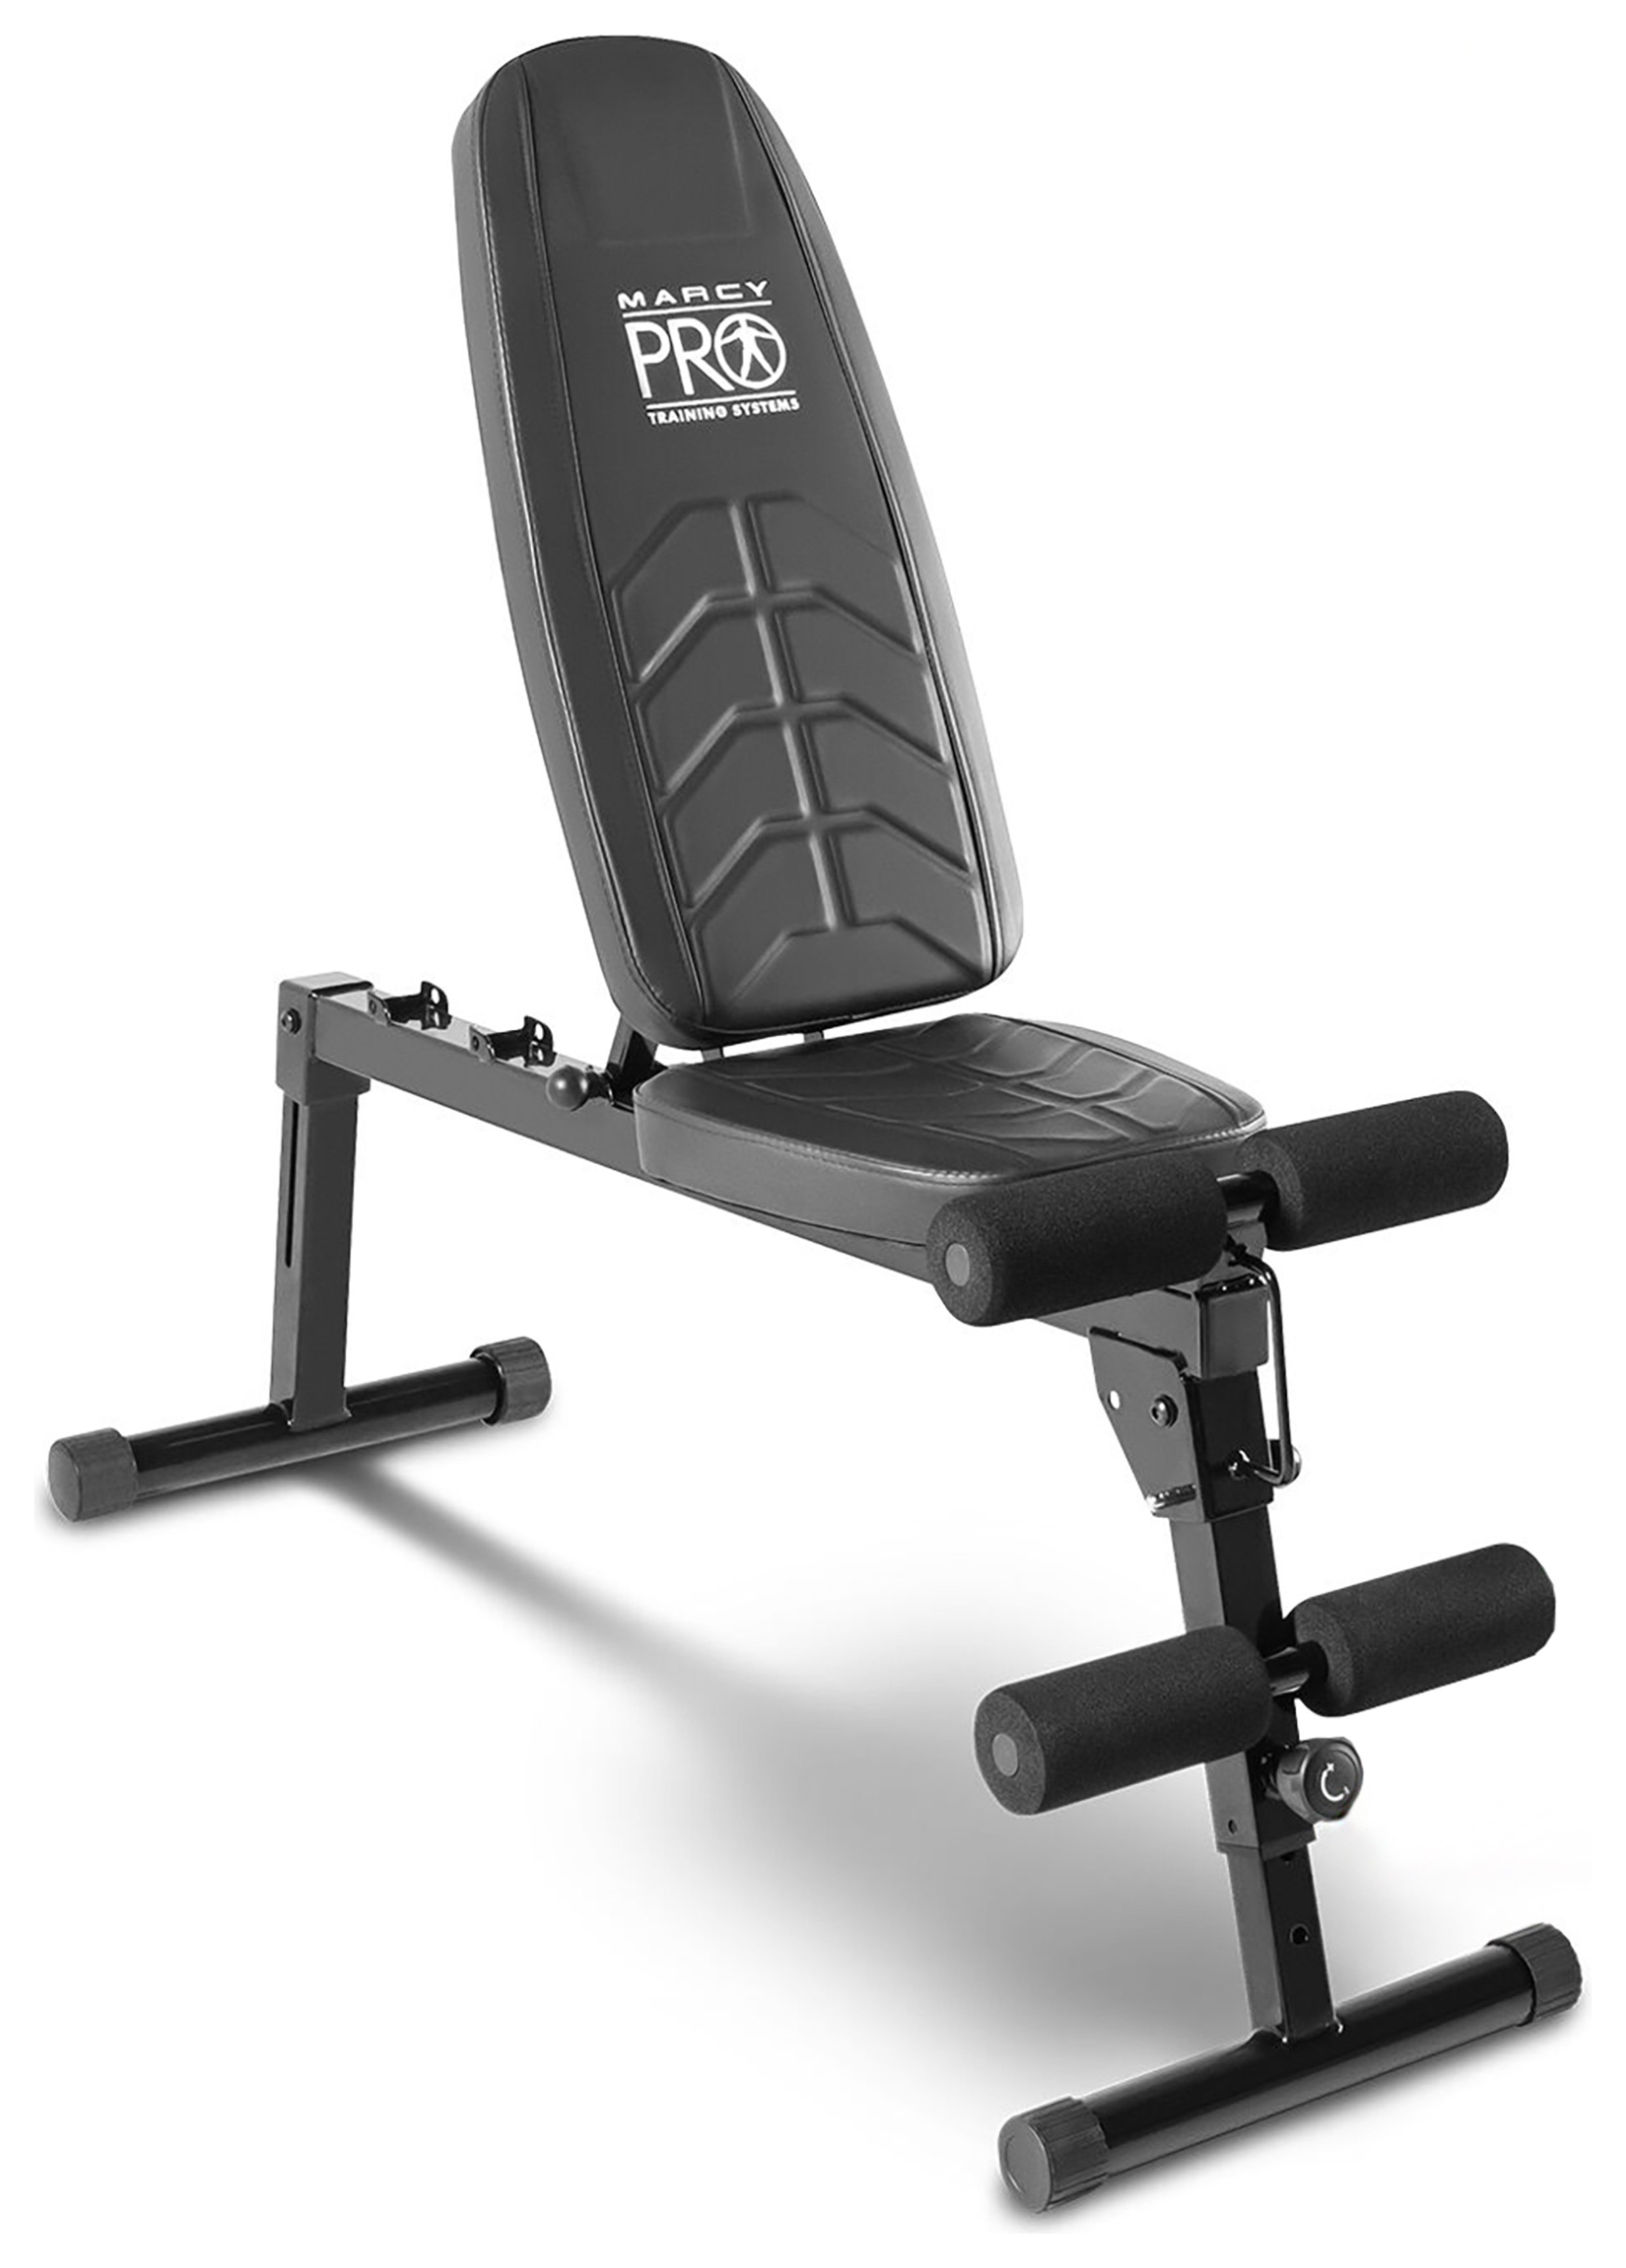 Marcy Pro Fold Flat Weight Bench Reviews